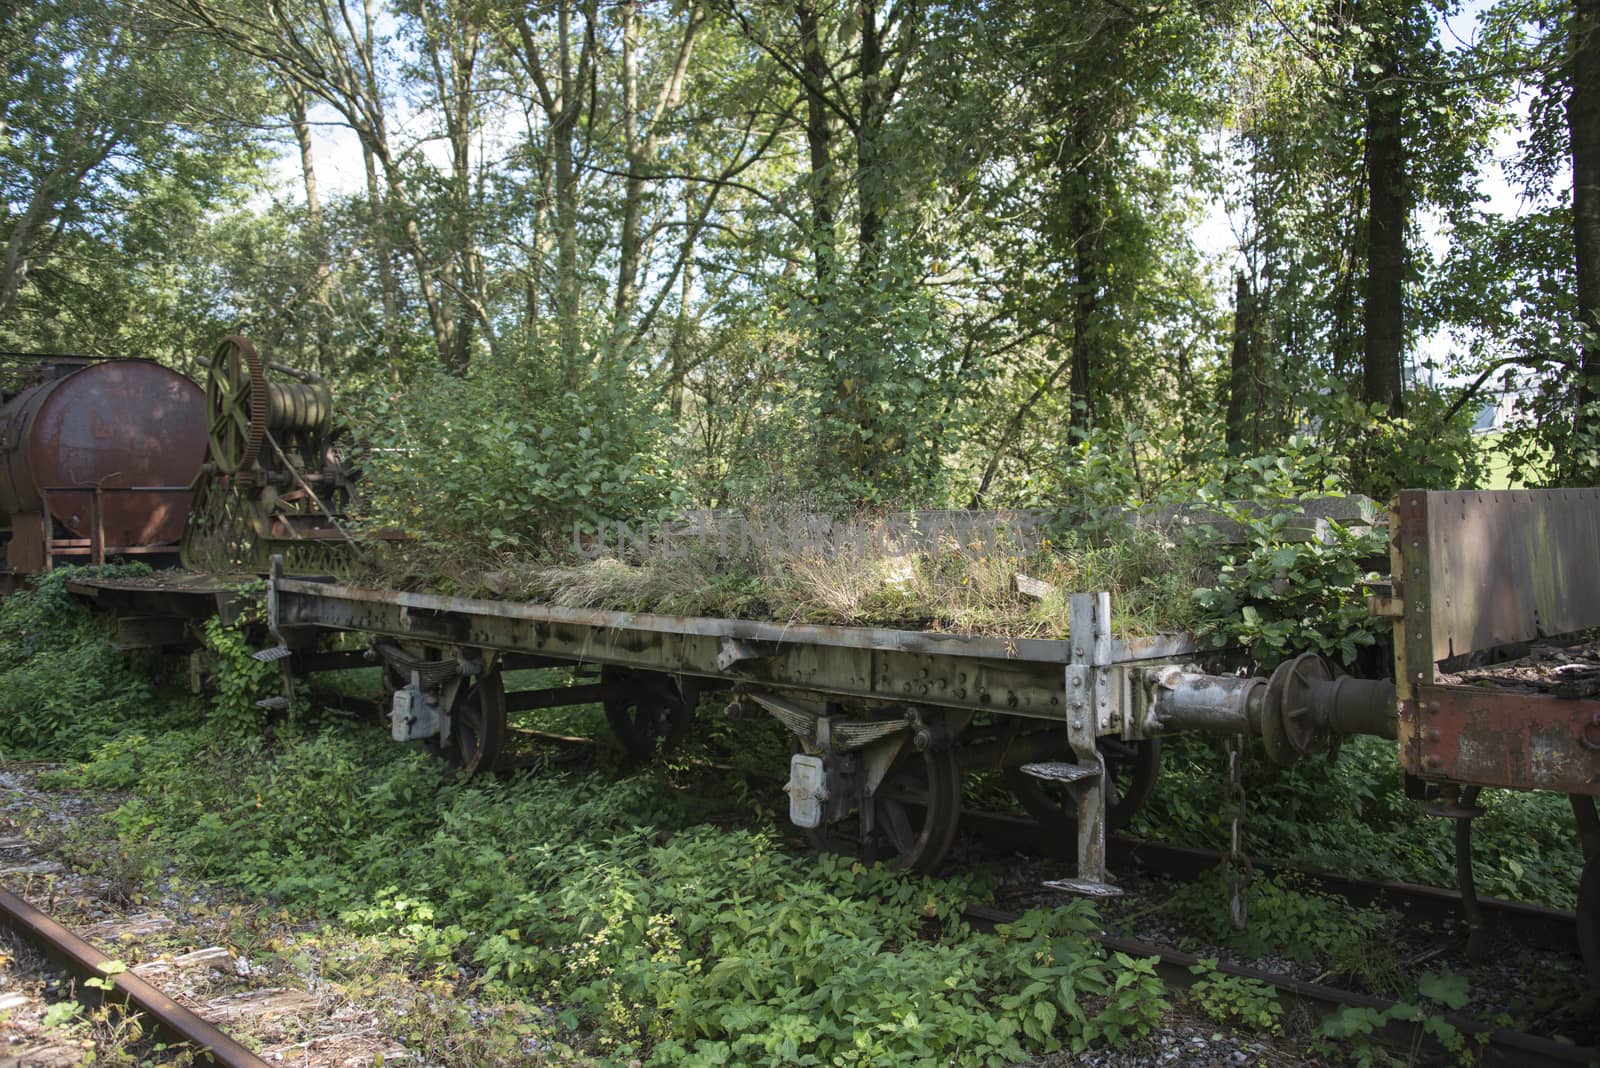 old rusted train at trainstation hombourg in belgium overgrown with plants and trees